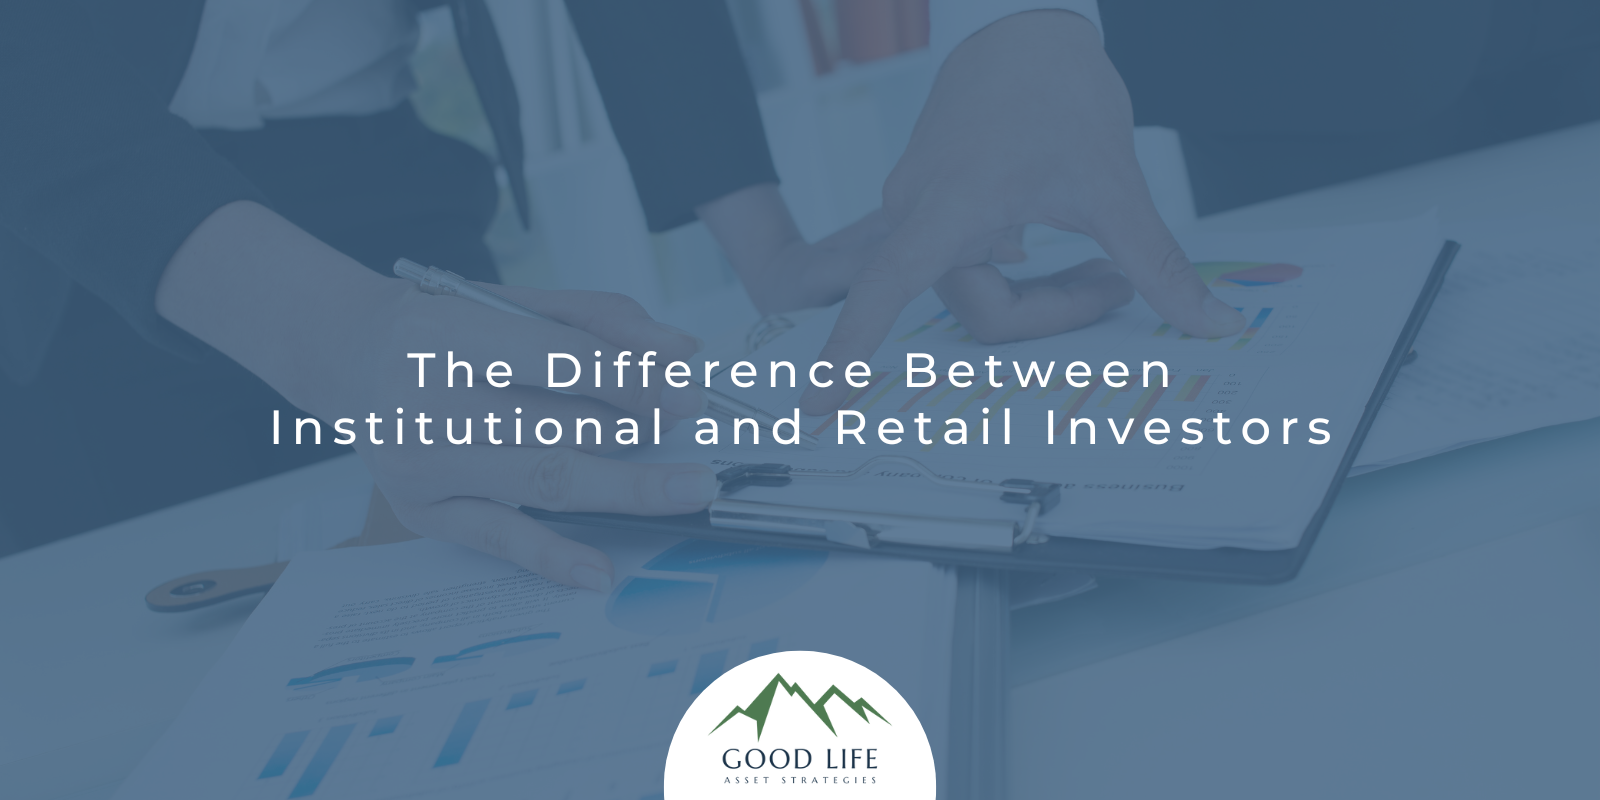 Know Your Terminology: The Difference Between Institutional and Retail Investors